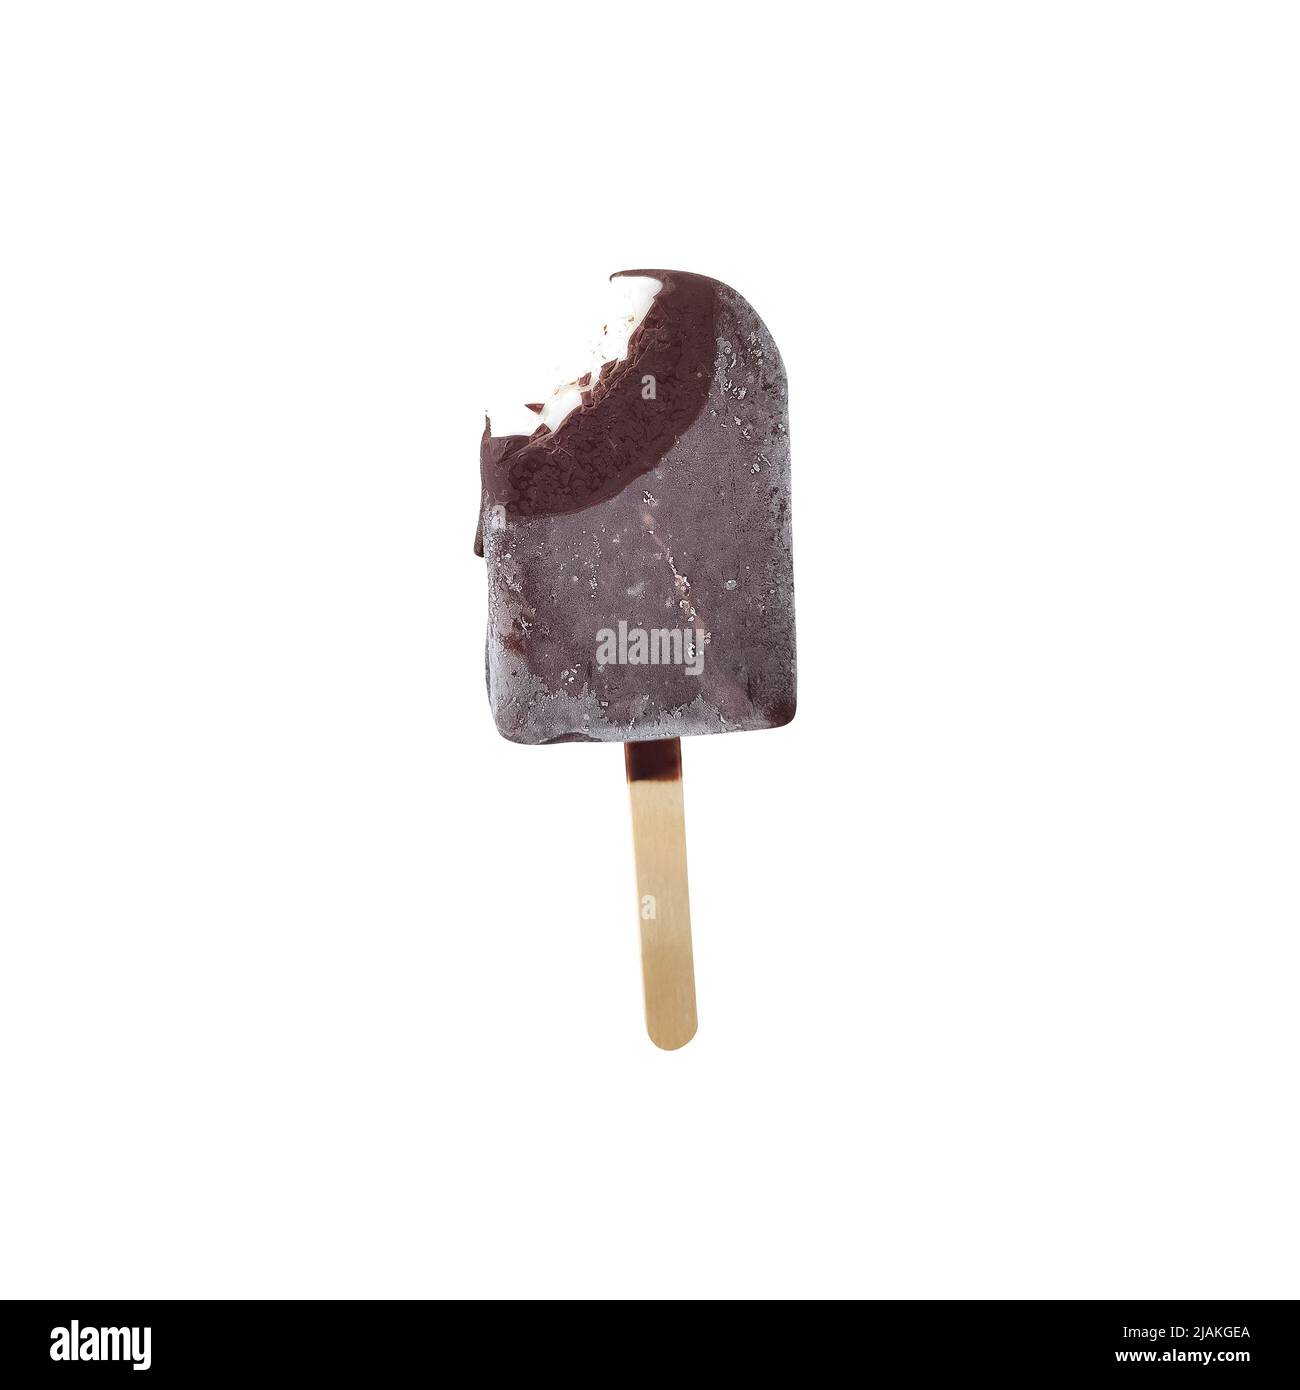 Chocolate ice cream on wooden stick. Tasty popsicle isolated on white background. Stock Photo